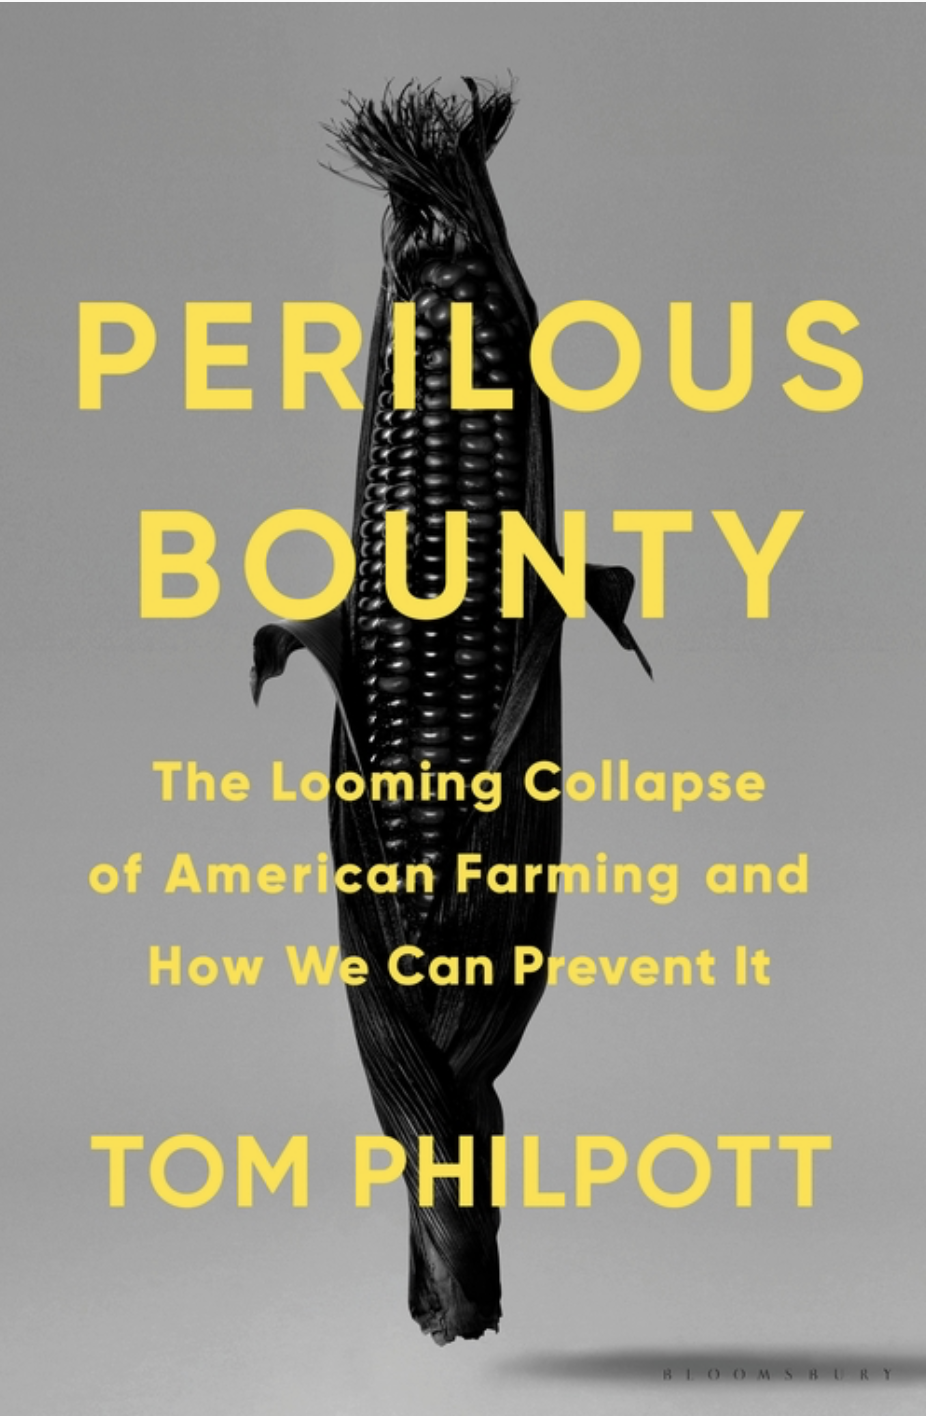 BOOK REVIEW: “Perilous Bounty: The Looming Collapse of American Farming and How We Can Prevent It” by Tom Philpott